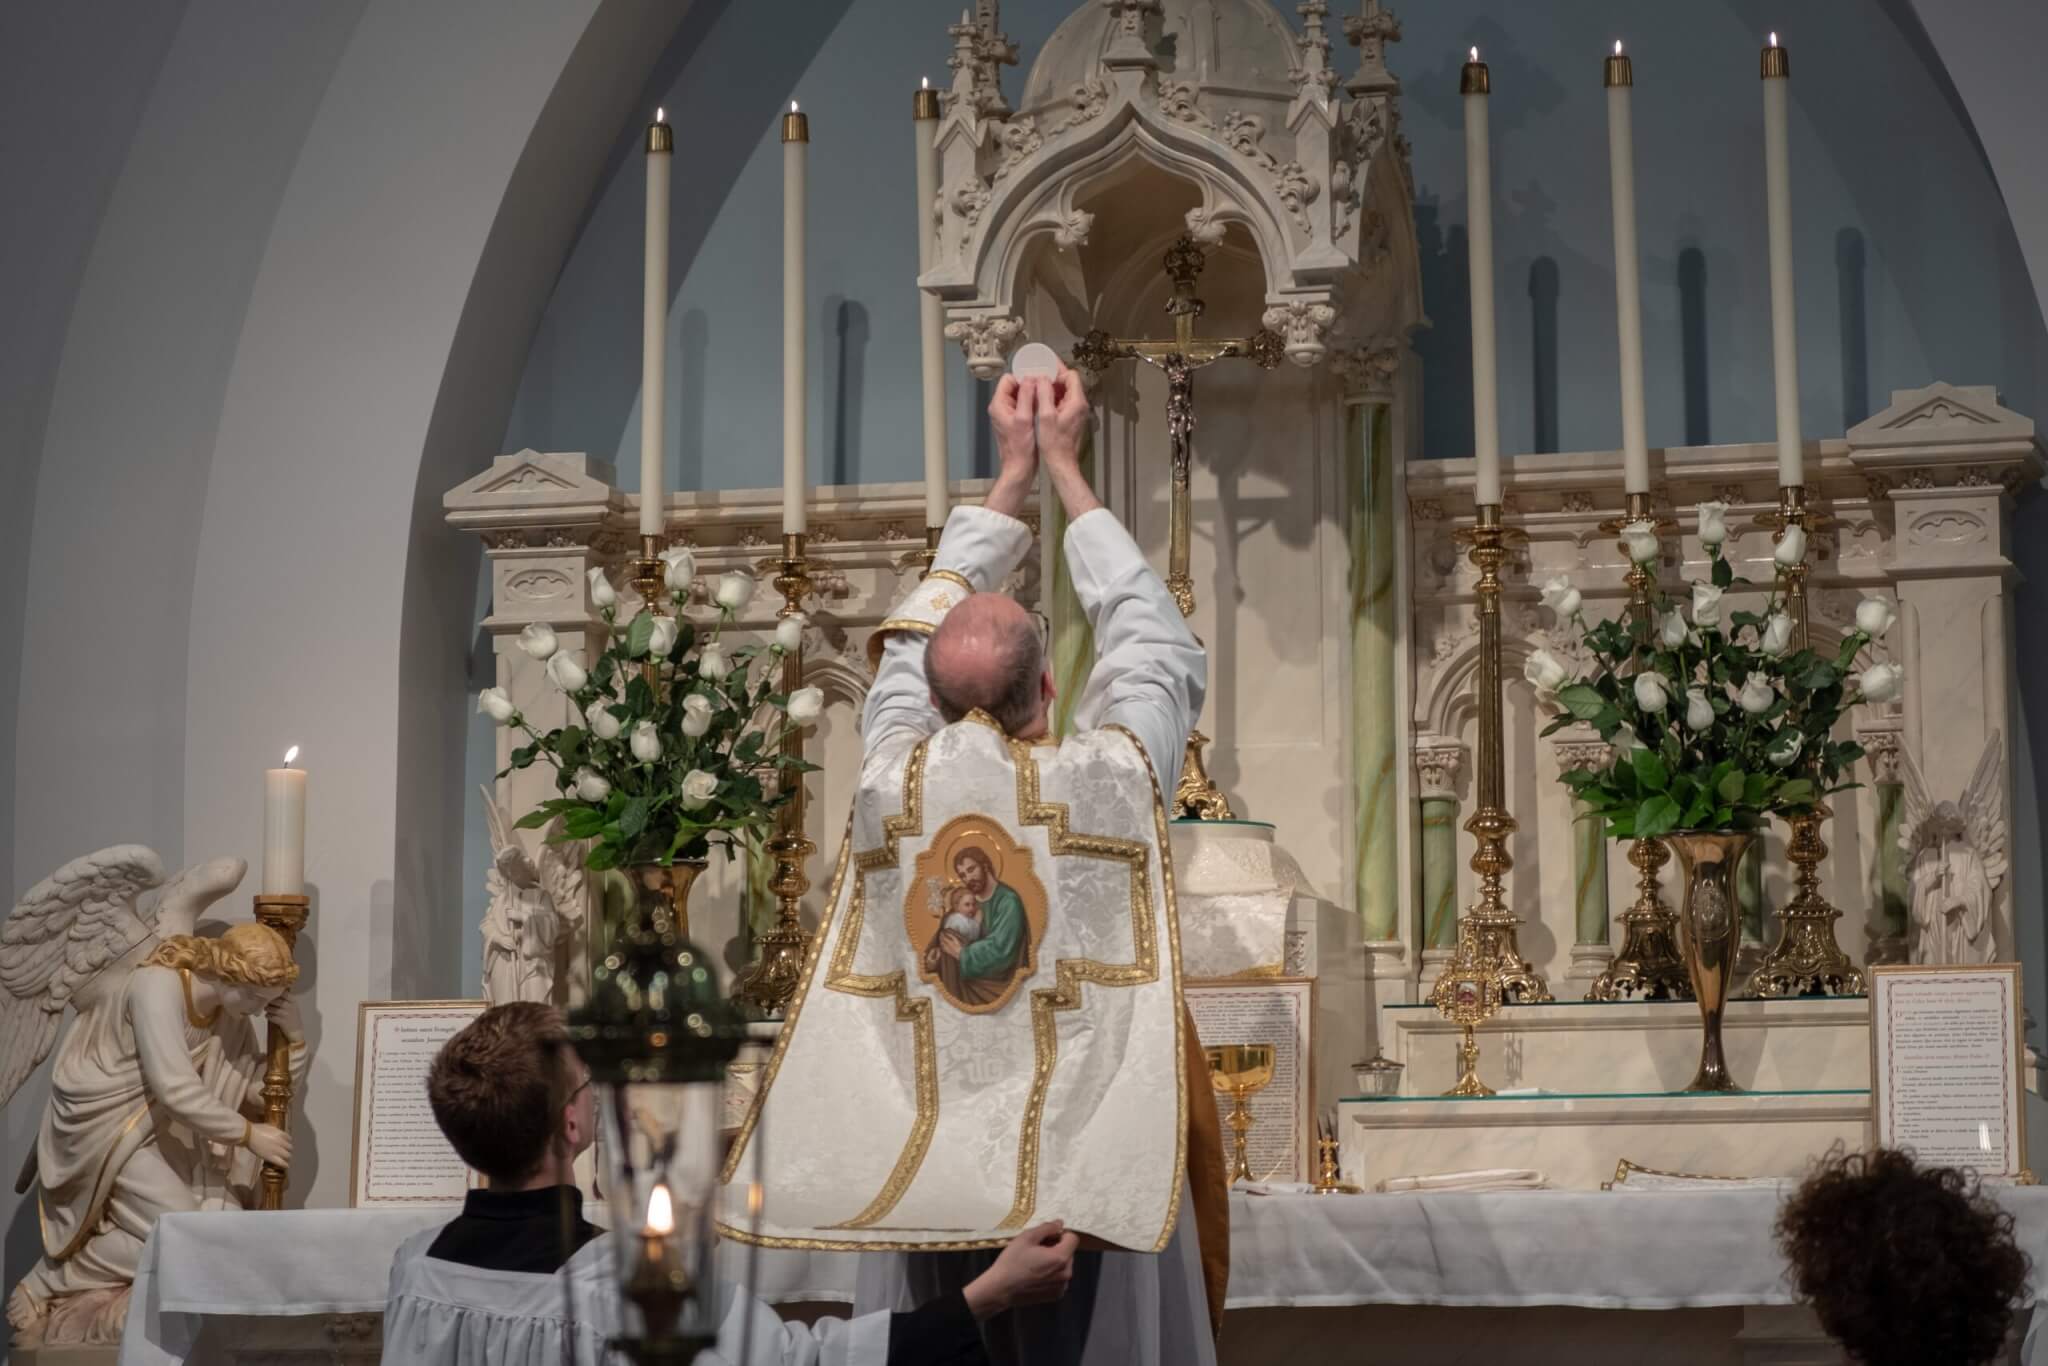 A catholic priest during the consecration at mass